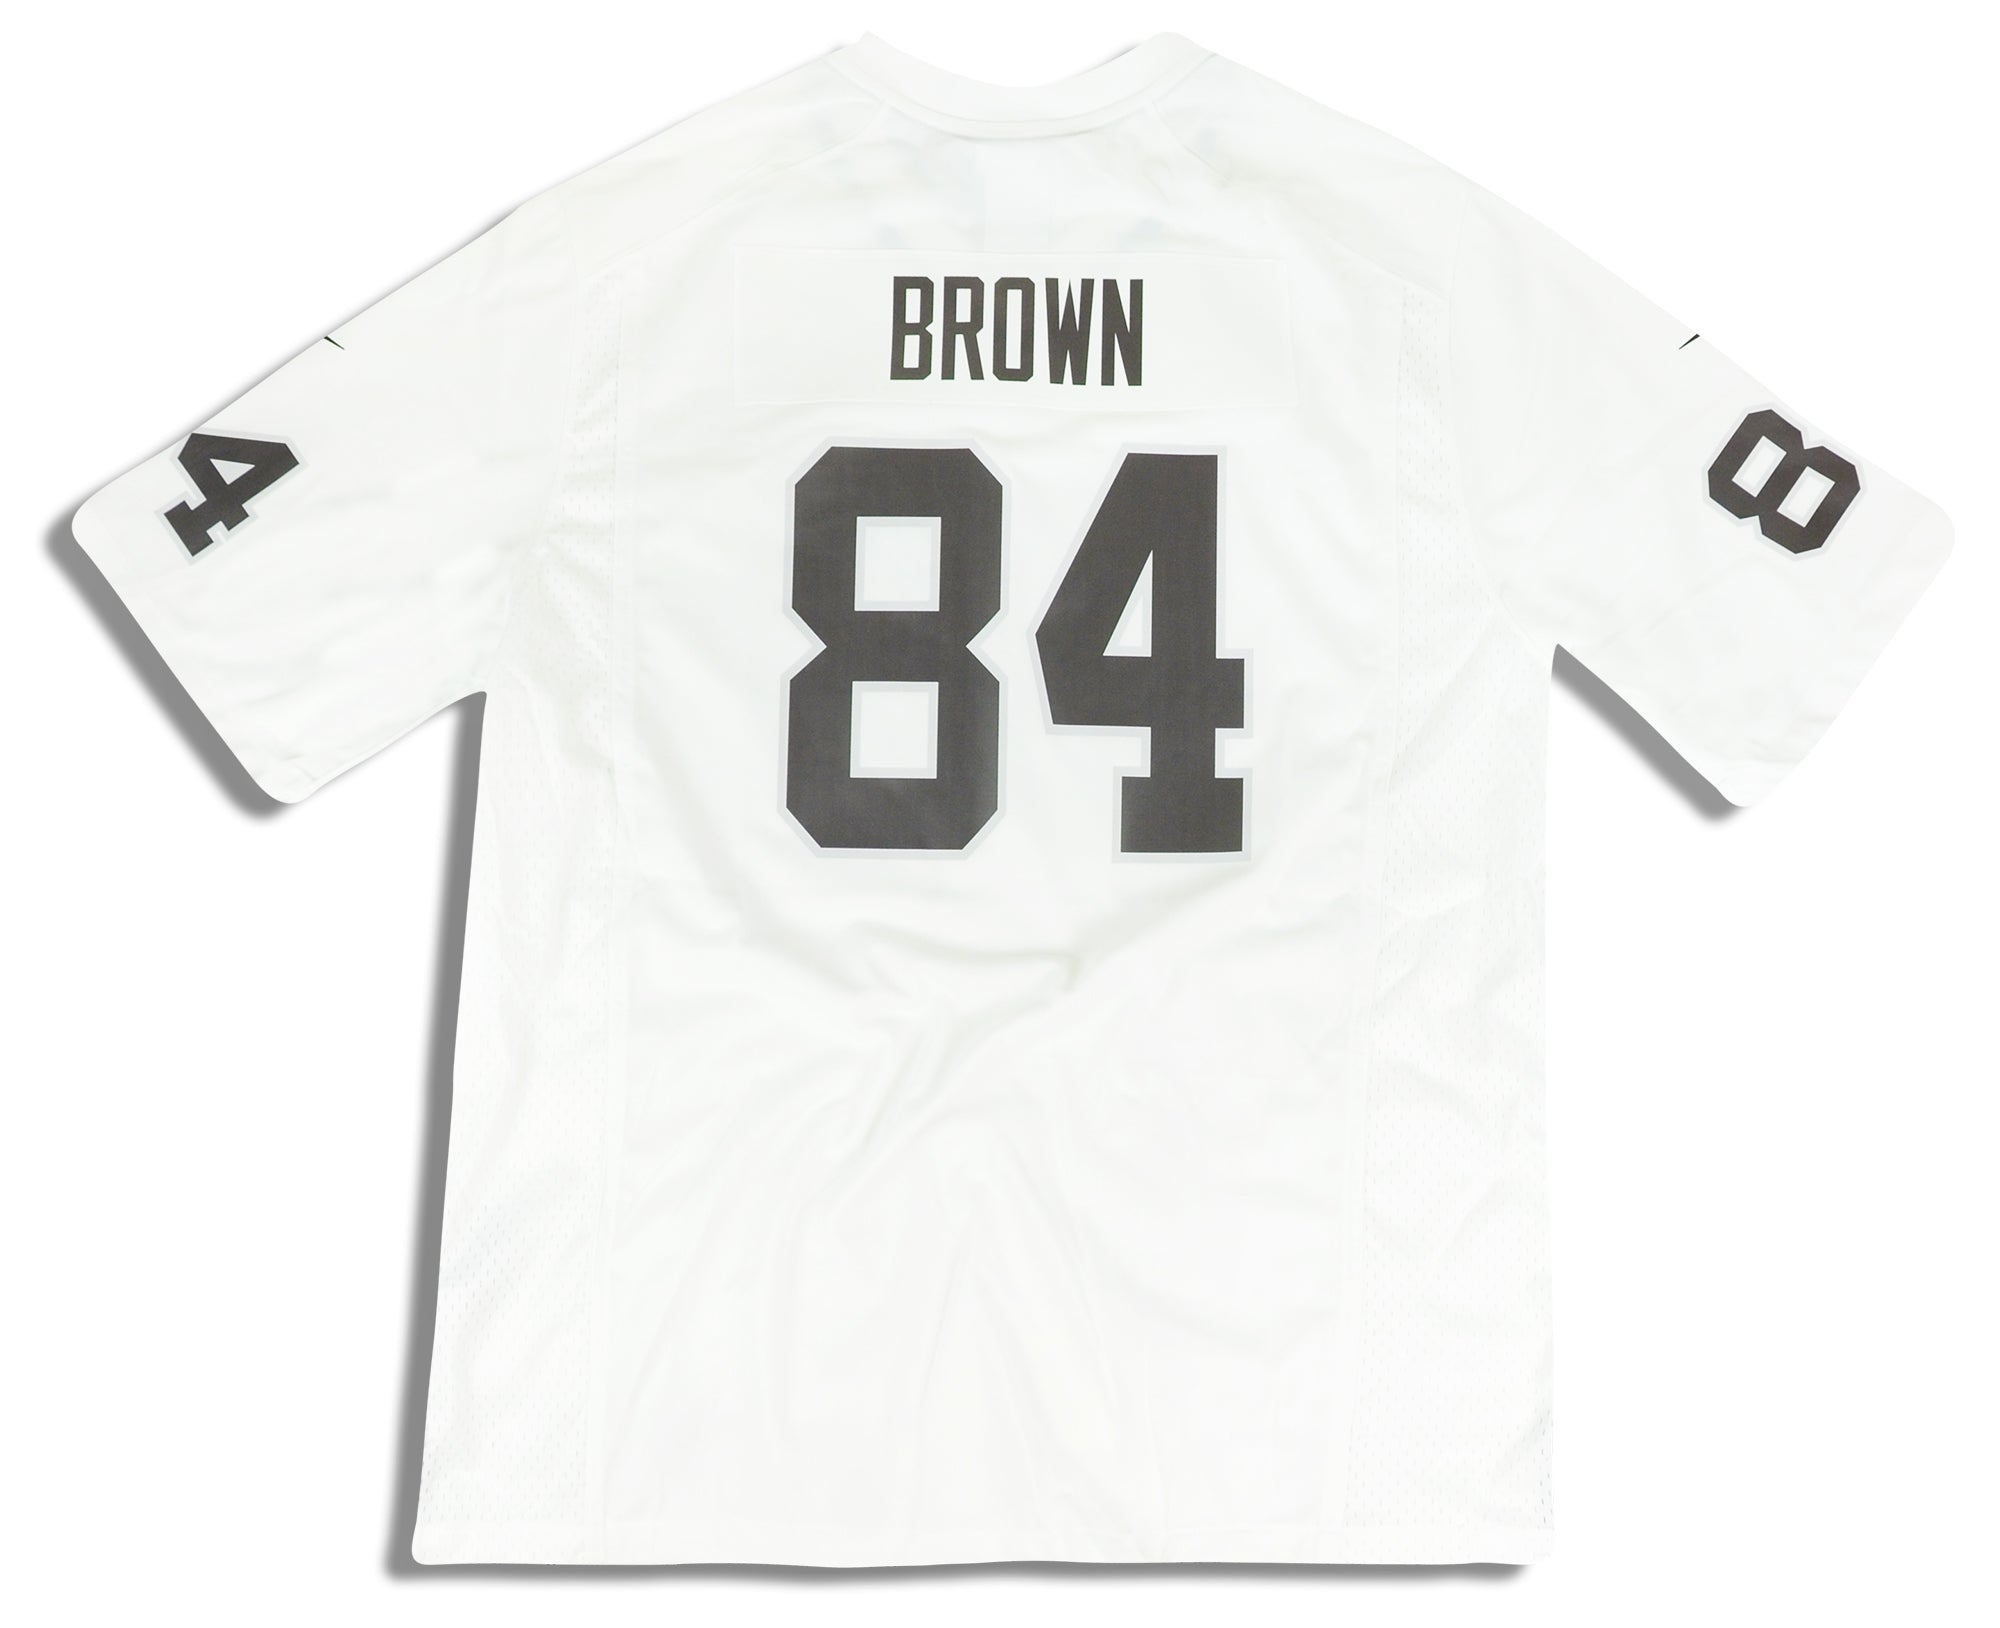 2019 OAKLAND RAIDERS BROWN #84 NIKE GAME JERSEY (AWAY) XXL - W/TAGS -  Classic American Sports